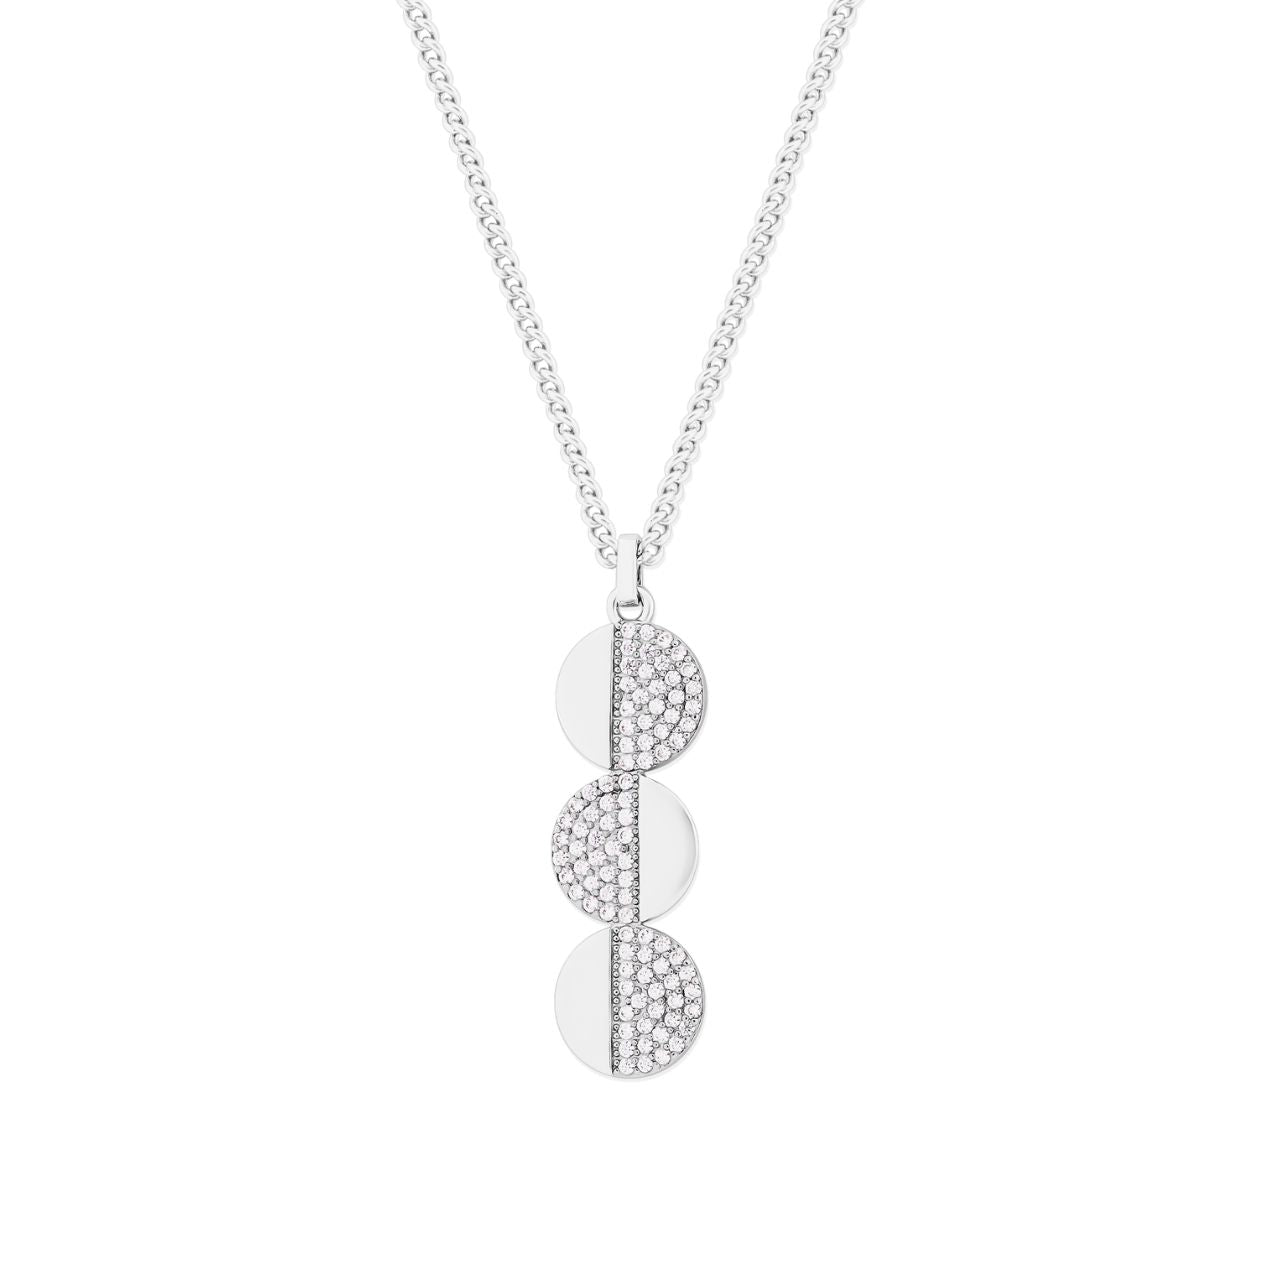 Circle Pave Silver 3 Circle Pendant by Tipperary Crystal This beautiful pendant necklace from Tipperary Crystal is perfect for those who appreciate classic design. Expertly crafted, the three interlinking circles feature an intricate texture for an eye-catching finish. Undeniably stylish, this pendant is sure to stand the test of time.